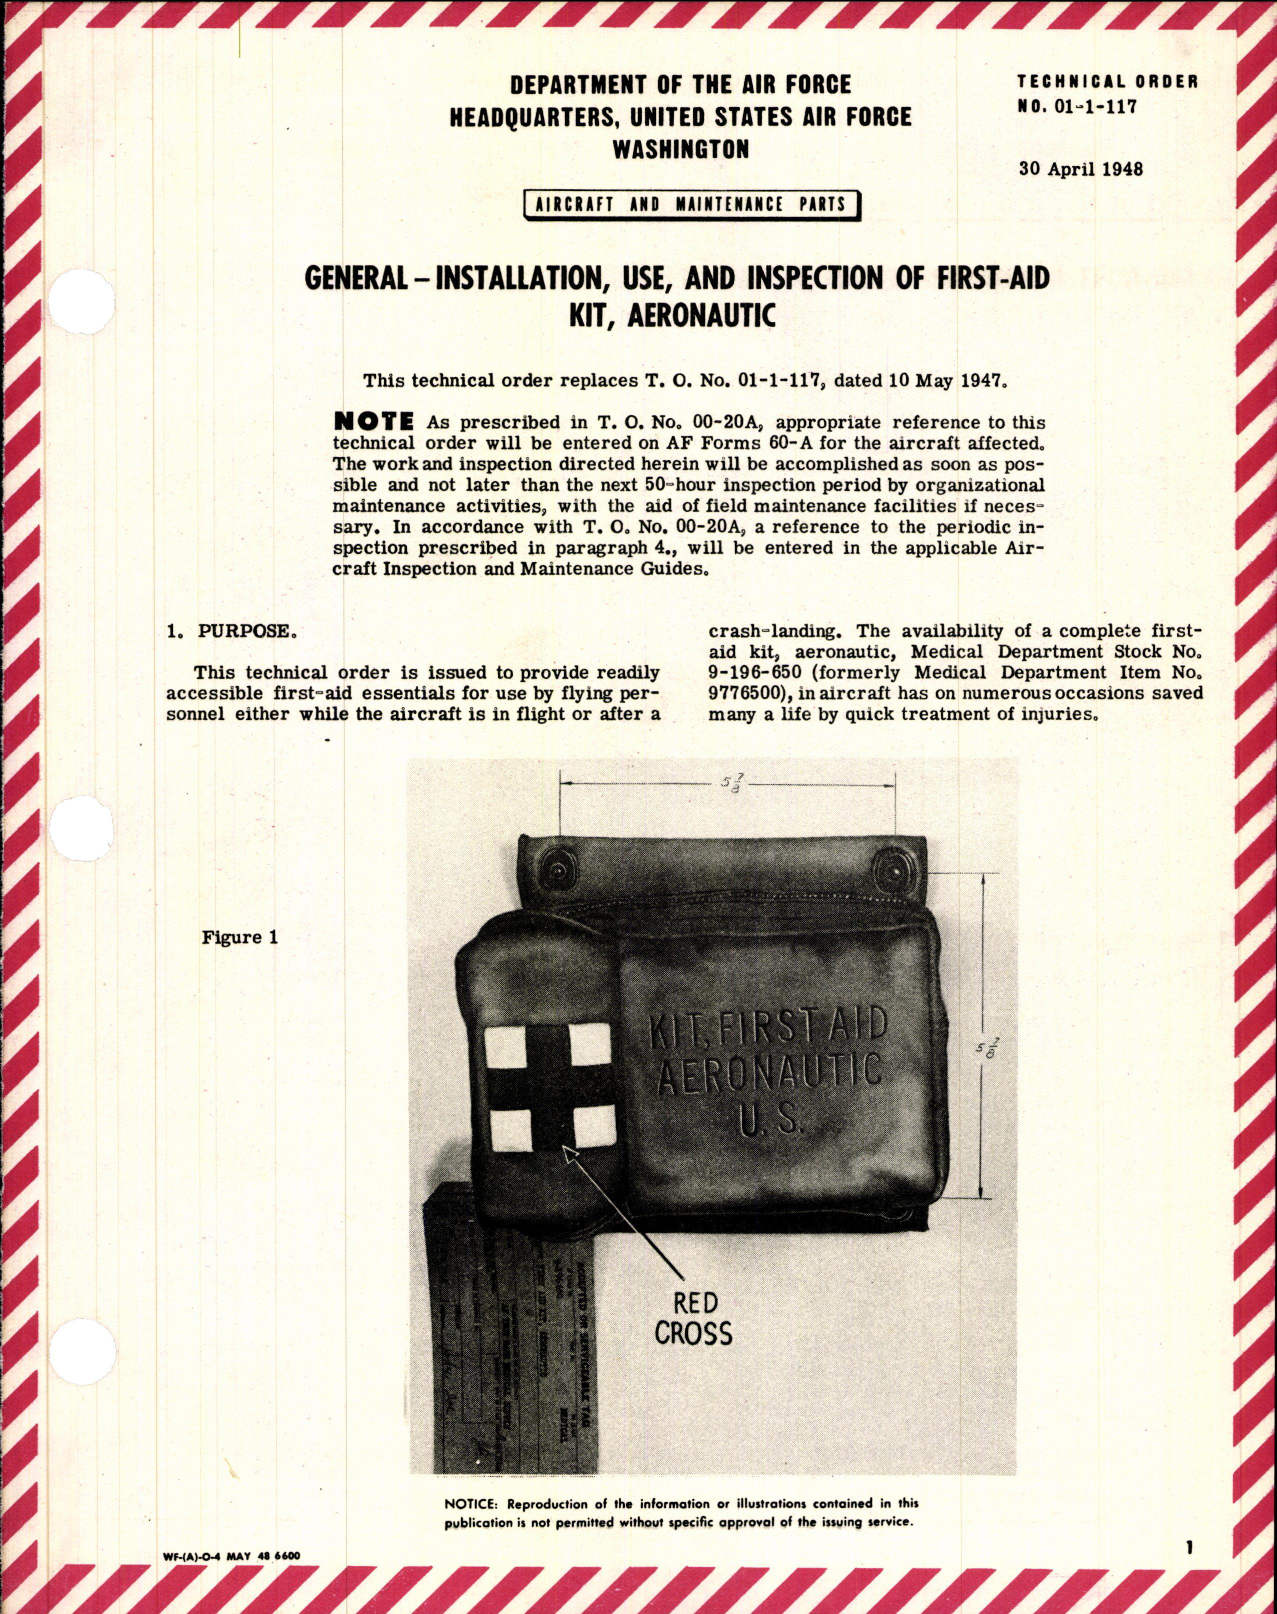 Sample page 1 from AirCorps Library document: Aircraft and Maintenance Parts; Installation, Use, and Inspection of First-Aid Kit, Aeronautic